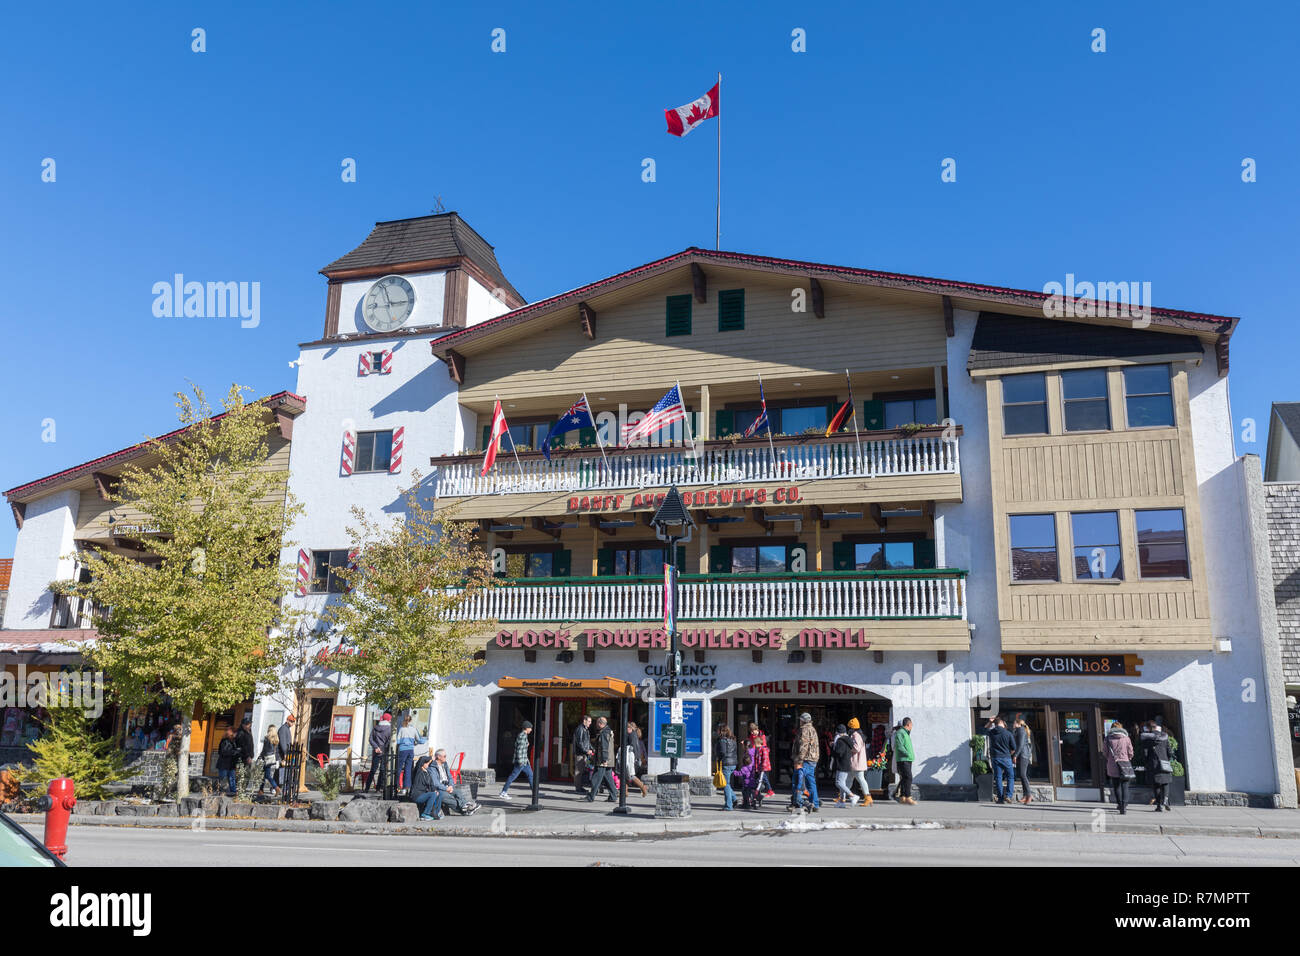 Alberta, Canada - October 7, 2018 : Scene of Downtown Banff, Tourist Shops in the center of Banff Stock Photo